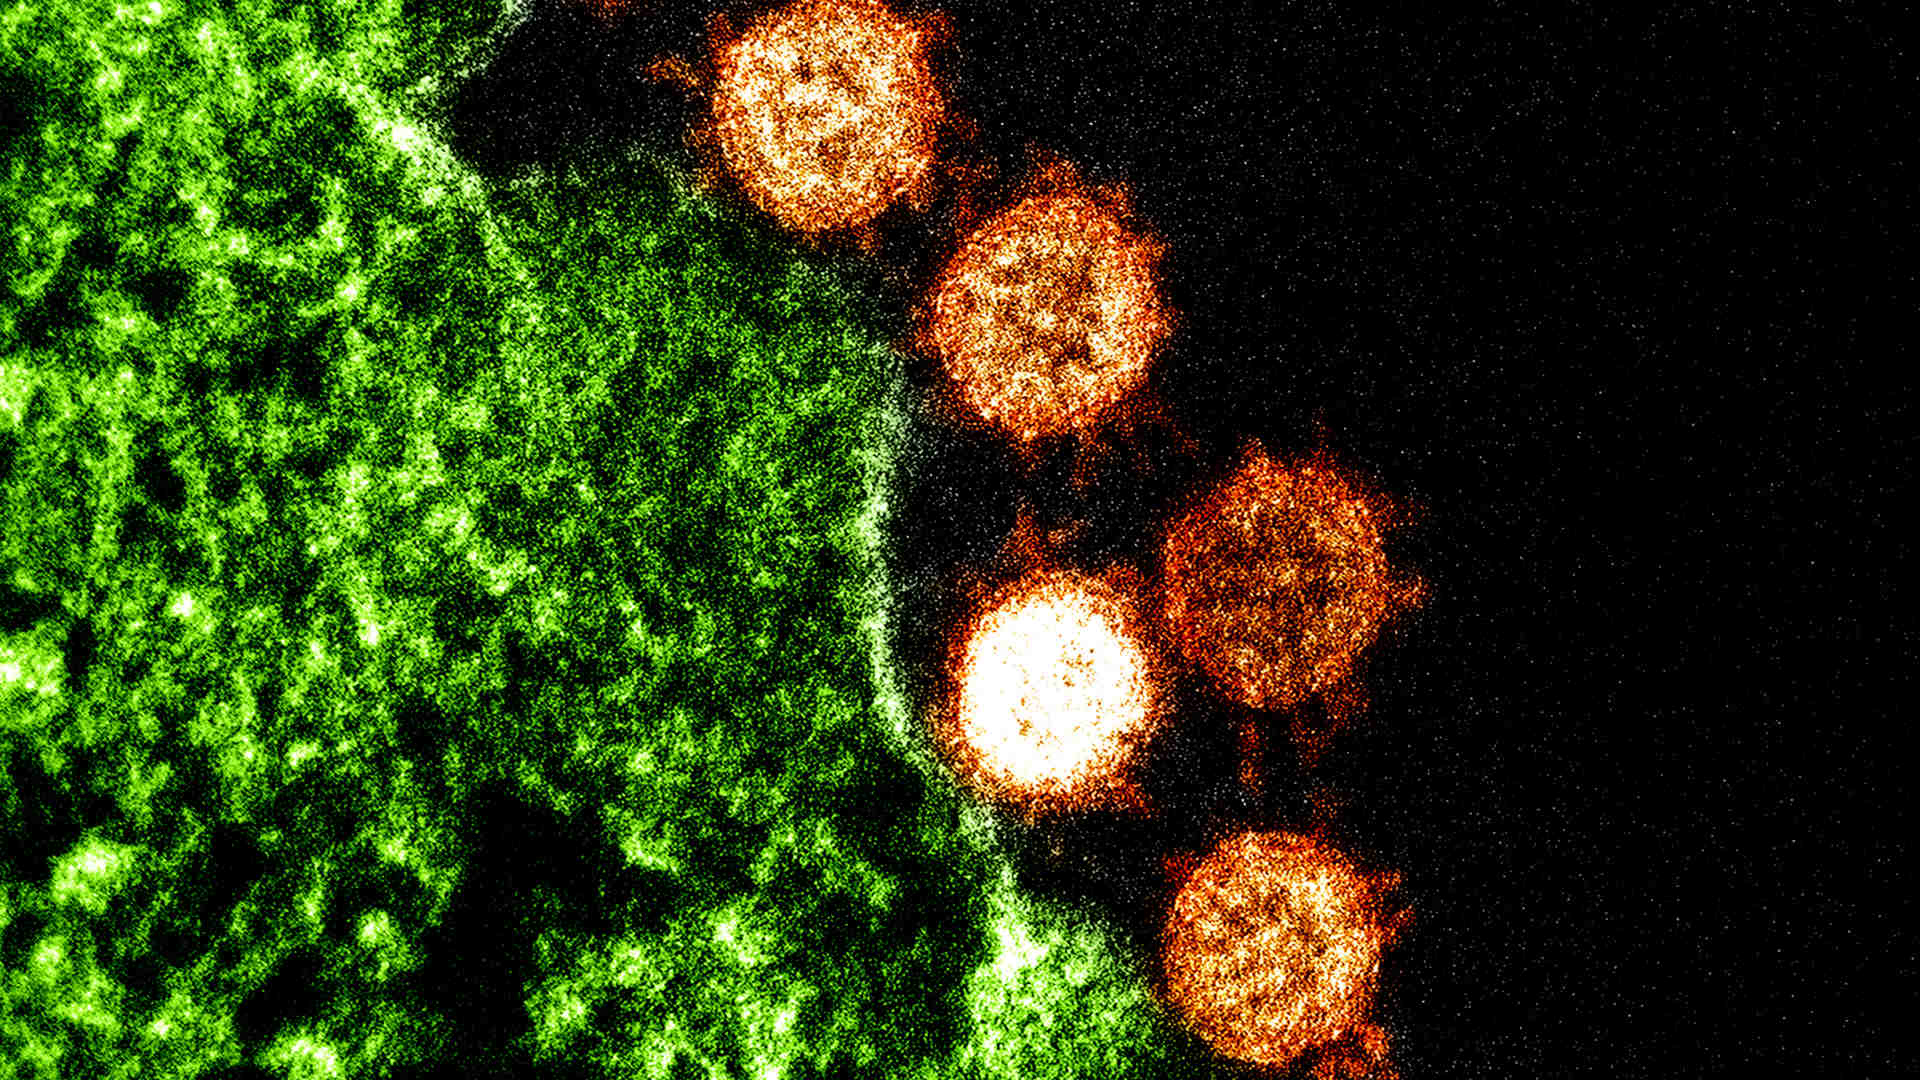 Electron microscope image of Severe Acute Respiratory Syndrome (SARS) virus particles (orange) found near an infected cell (green). Image captured and color-enhanced at the NIAID Integrated Research Facility in Fort Detrick, Maryland.